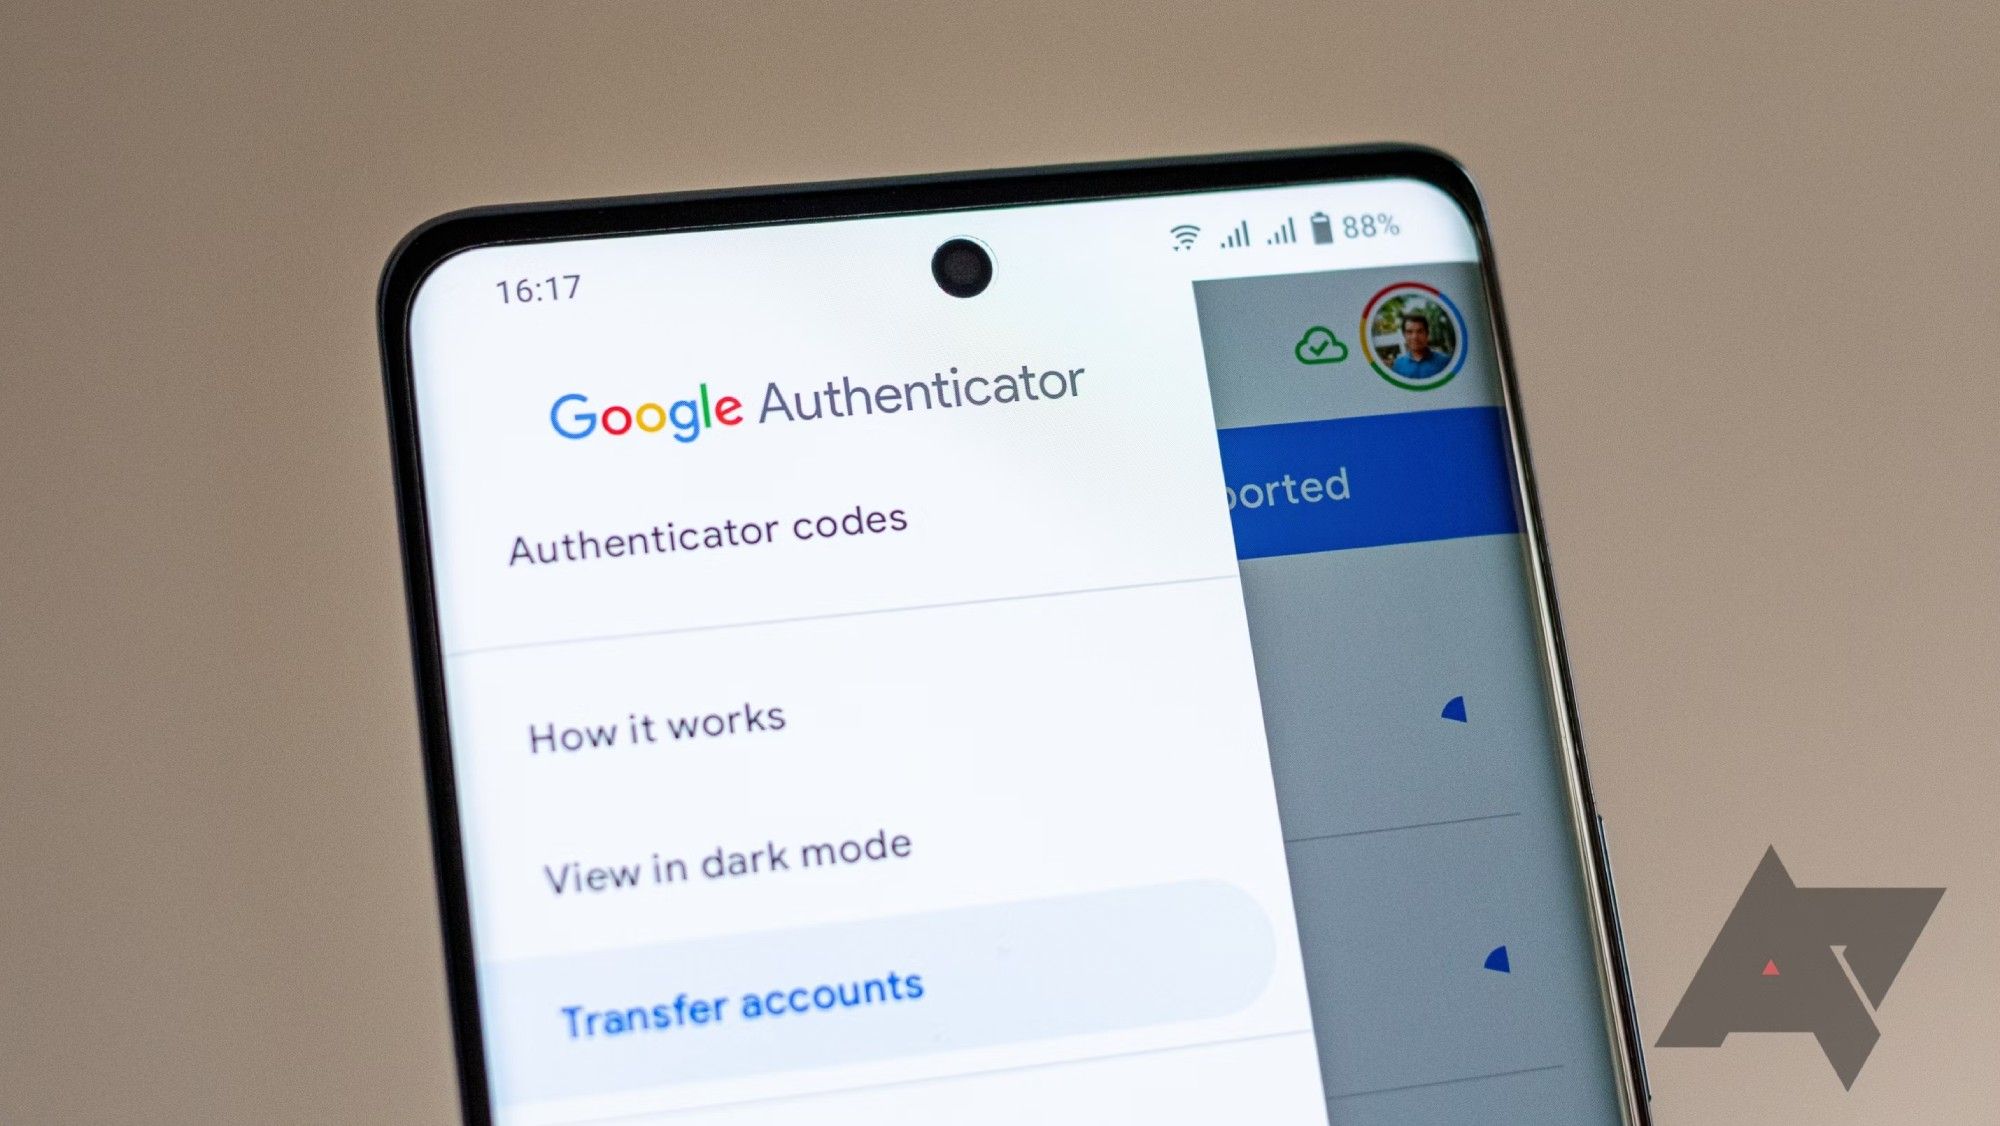 A smartphone showing the main menu on Google Authenticator